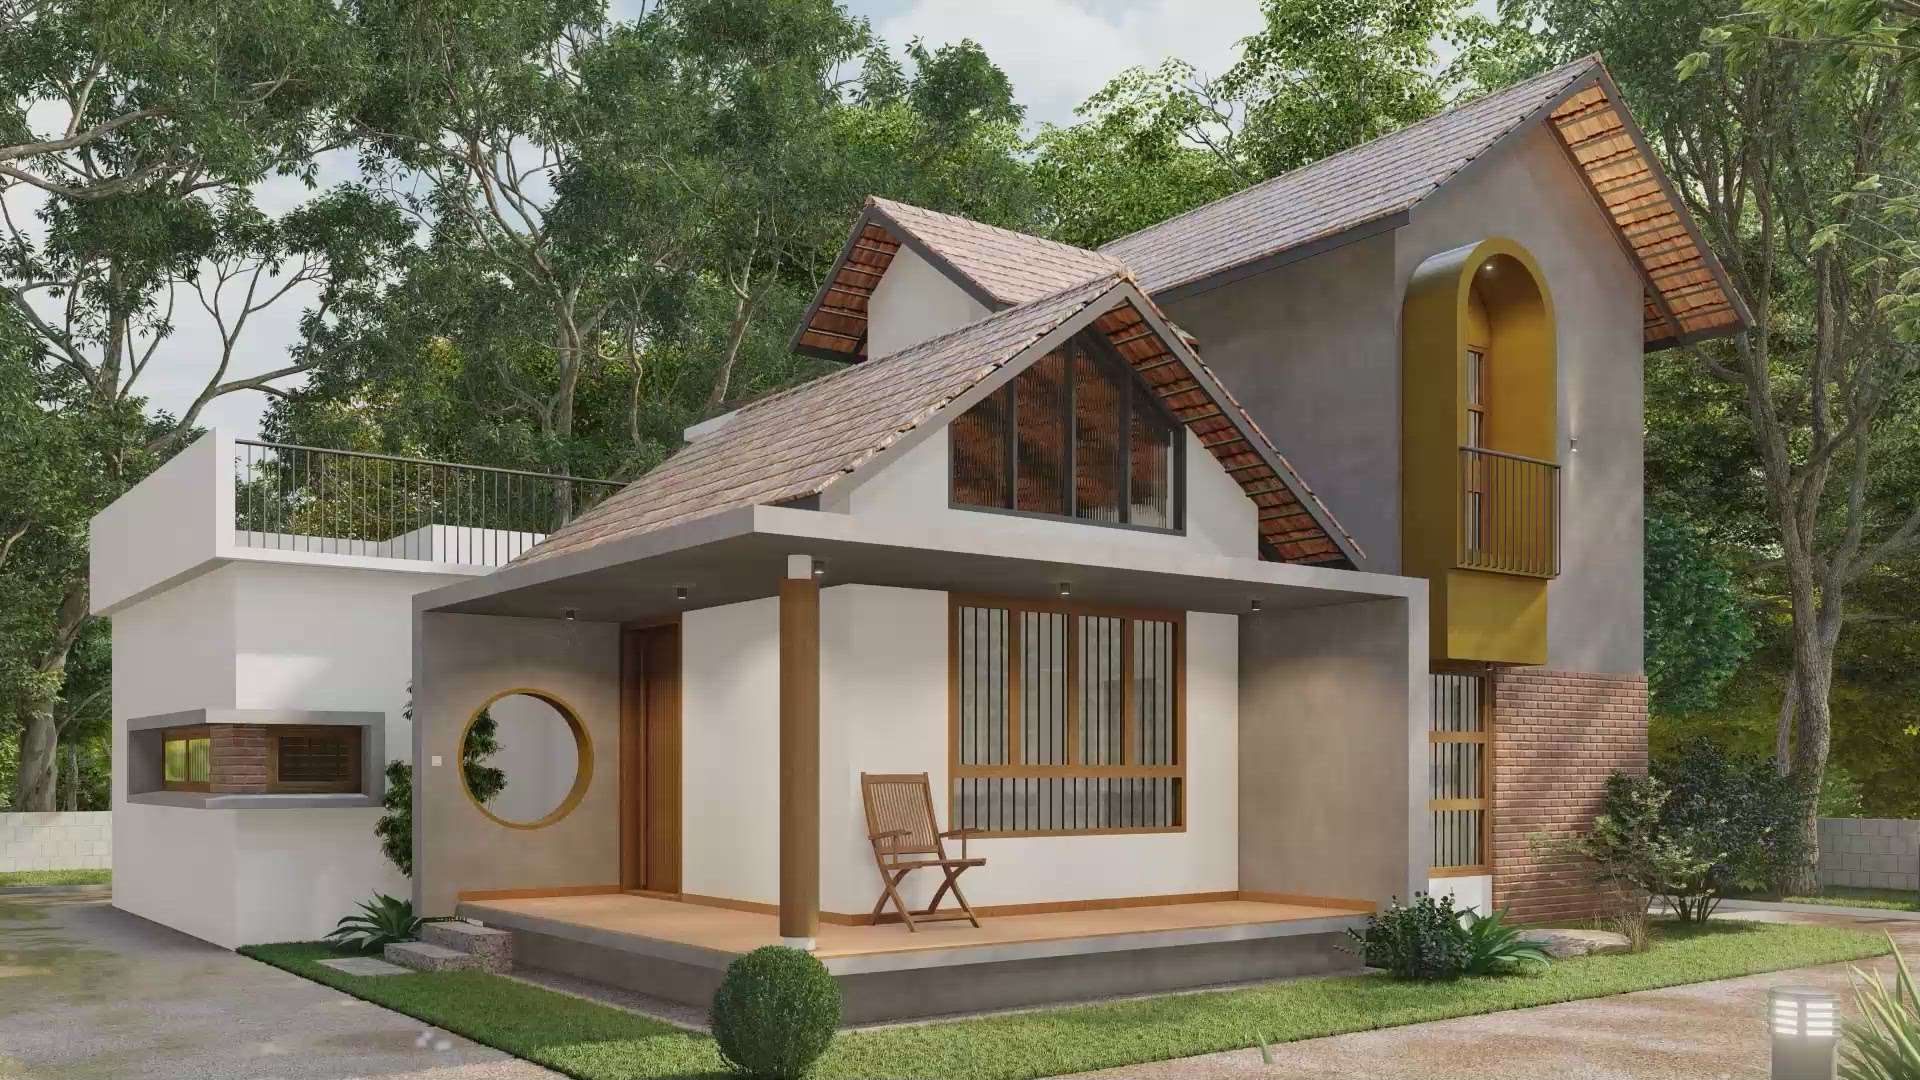 I R E S I D E N C E  F O R  M A N O J I
Place : Ponkunnam 
Area : 1850 sq ft
Category : Residential
Style : Tropical
Type : Design, Construction & Interiors


#newbeginnings #newstart #newproject #residence #residentialproject #keralaresidence #keralaarchitecture #keralastyle #keralahomes #tropical #tropicalstyle #tropicalarchitecture #architecture #architecturevibes #homedesign #designkerala #beautifulhomes #architecturelovers #ponkunnam #kottayam #3dvisualization #lumion #ongoingsite #newpost #architecturedaily